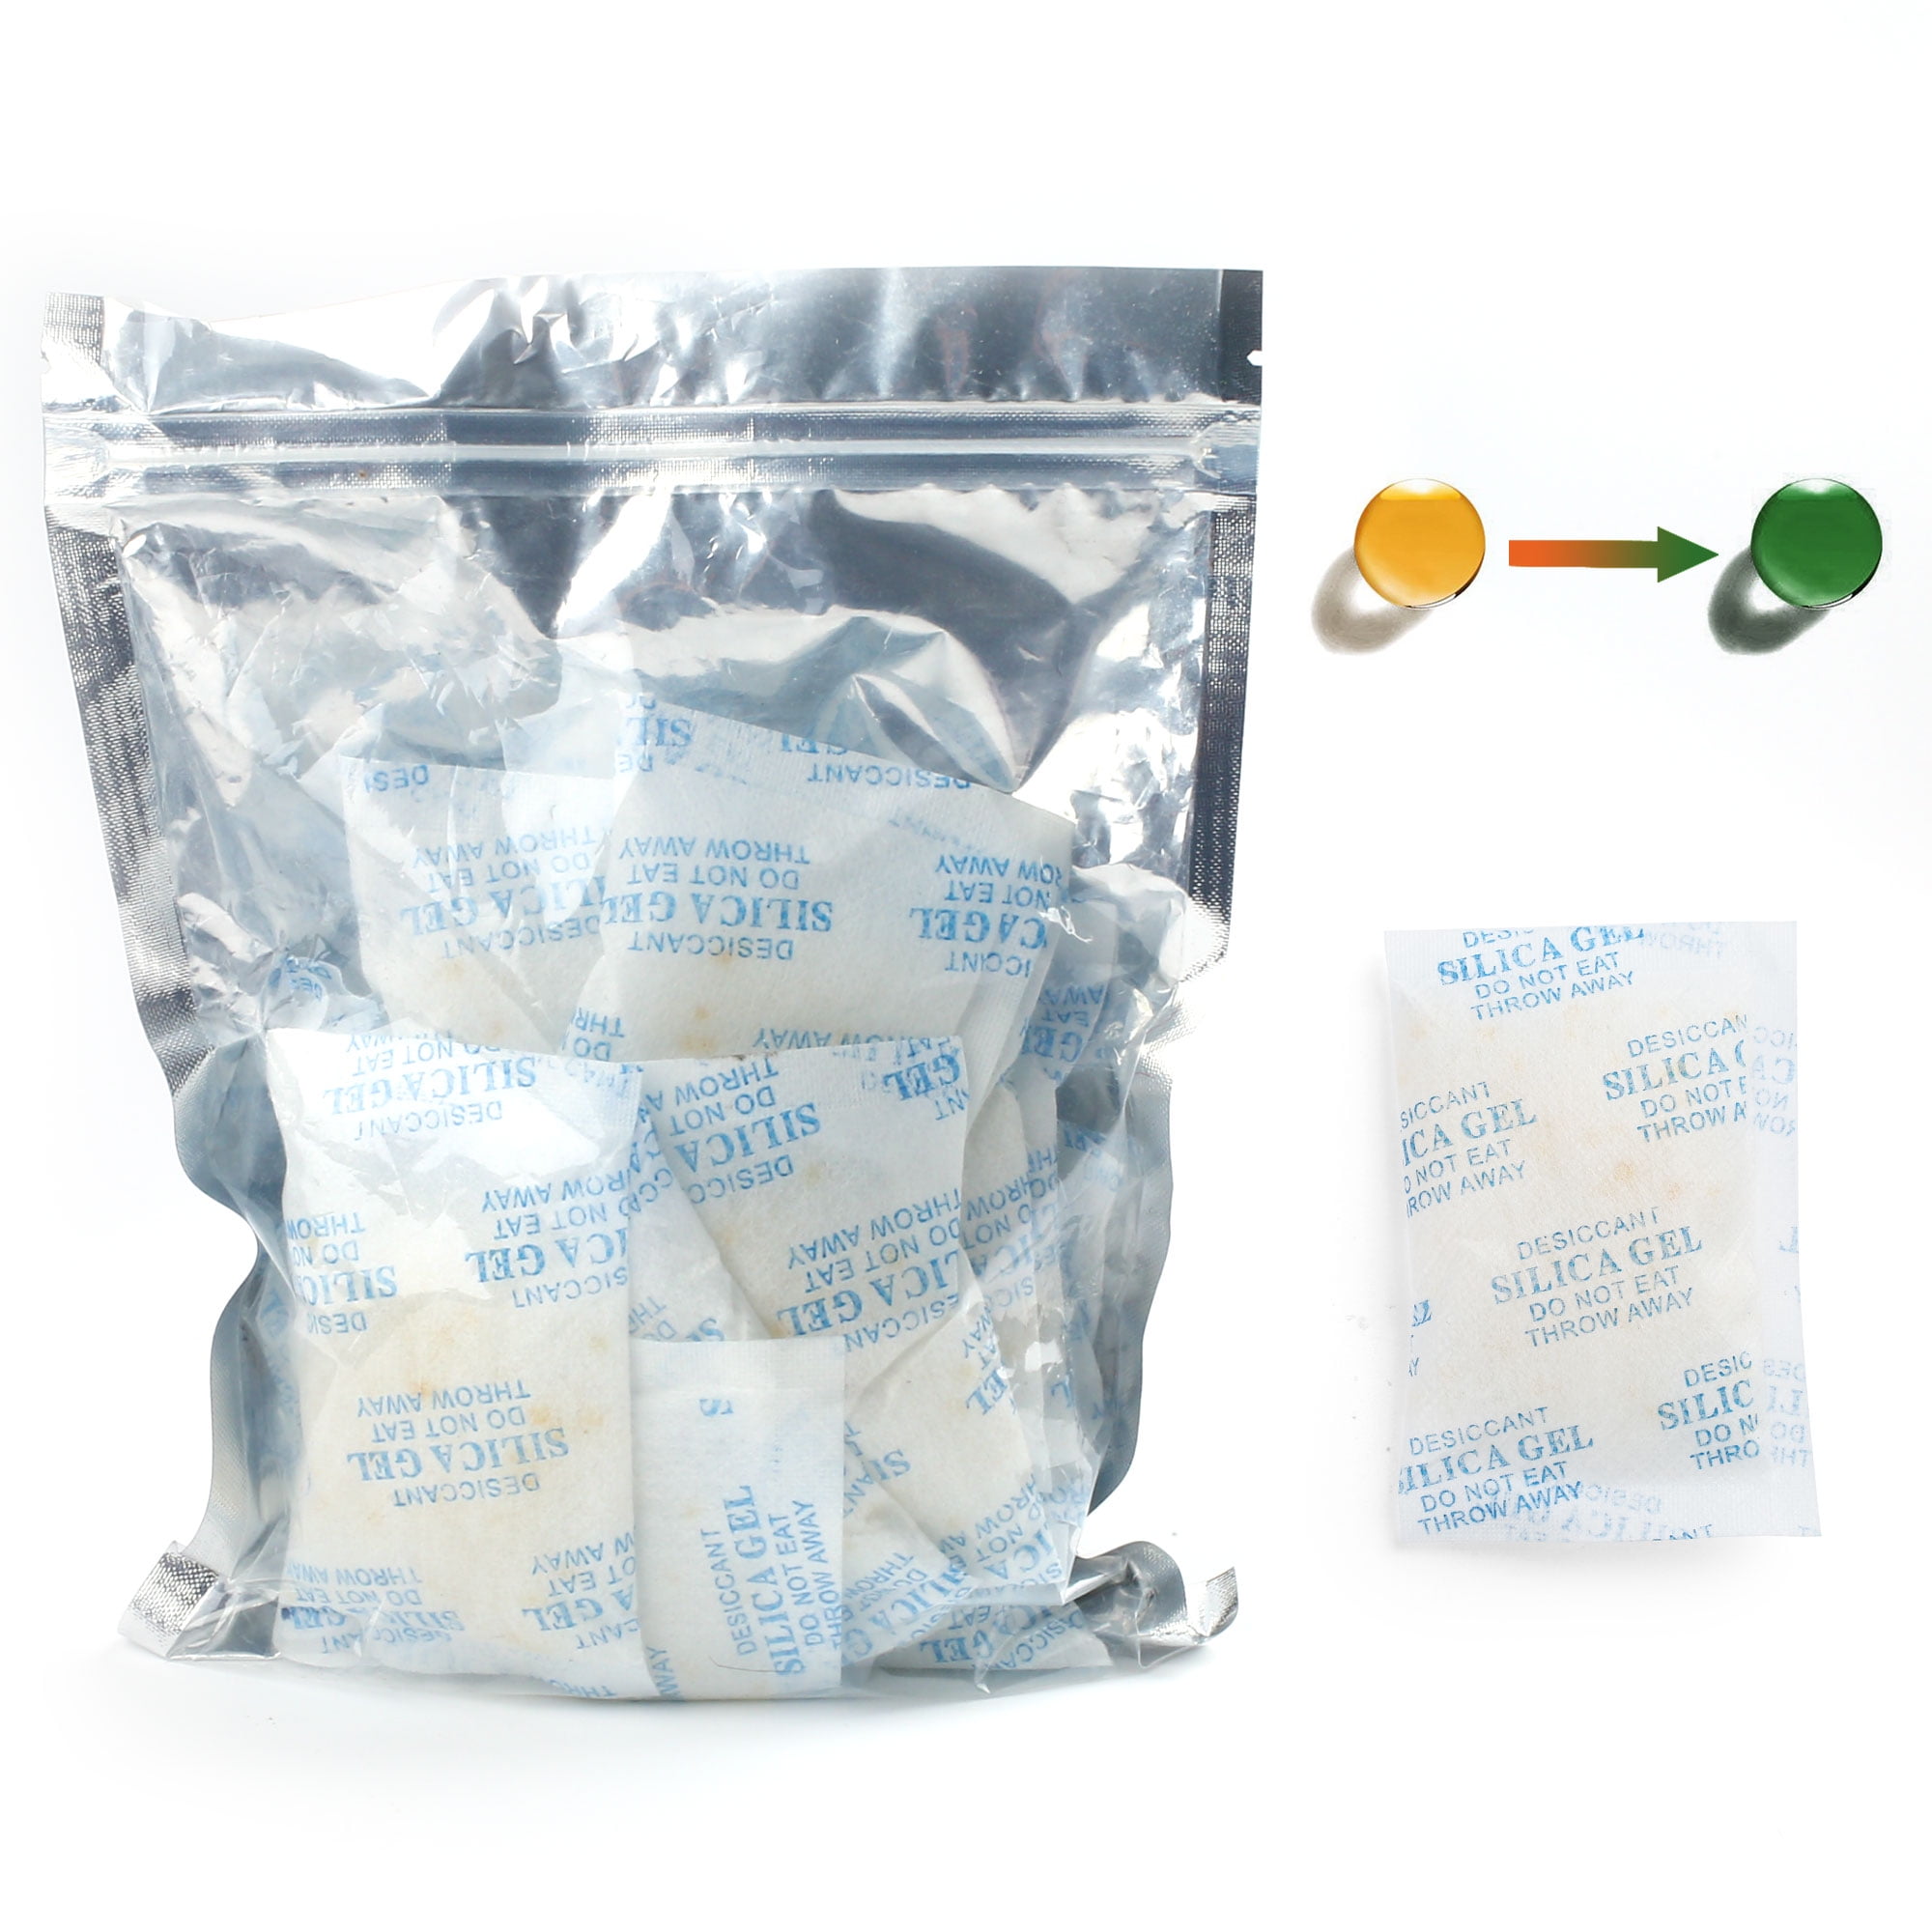 LotFancy Silica Gel Packets, 300 Packs 0.5 Gram, Indicating Desiccant  Dehumidifier Packets, Moisture Absorber Bags for Spices Jewelry Shoes